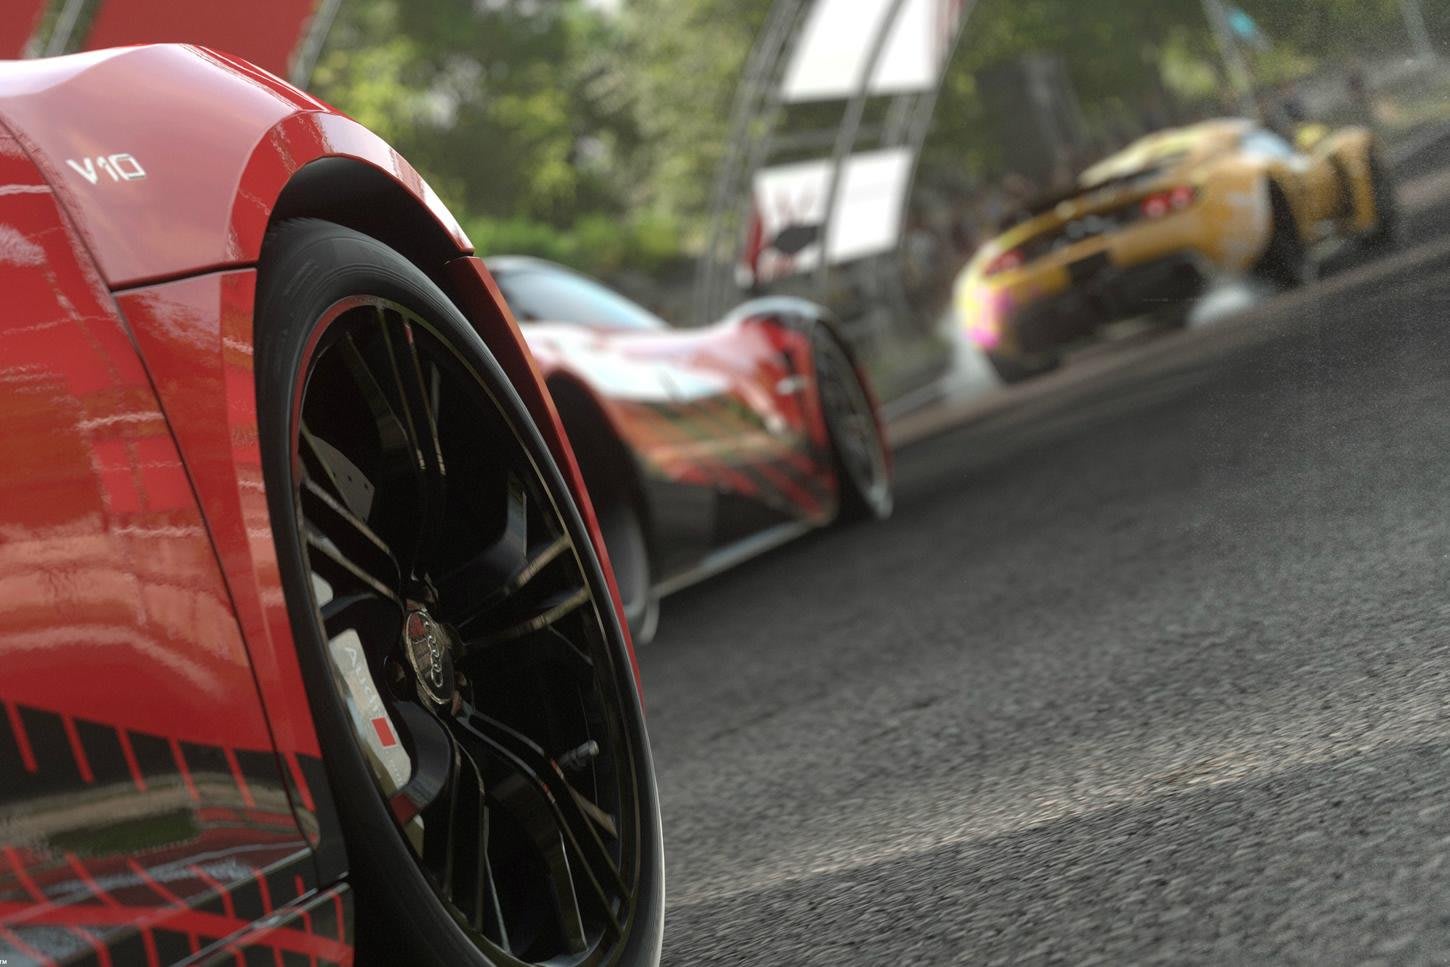 Is Forza Motorsport 8 on PS4?